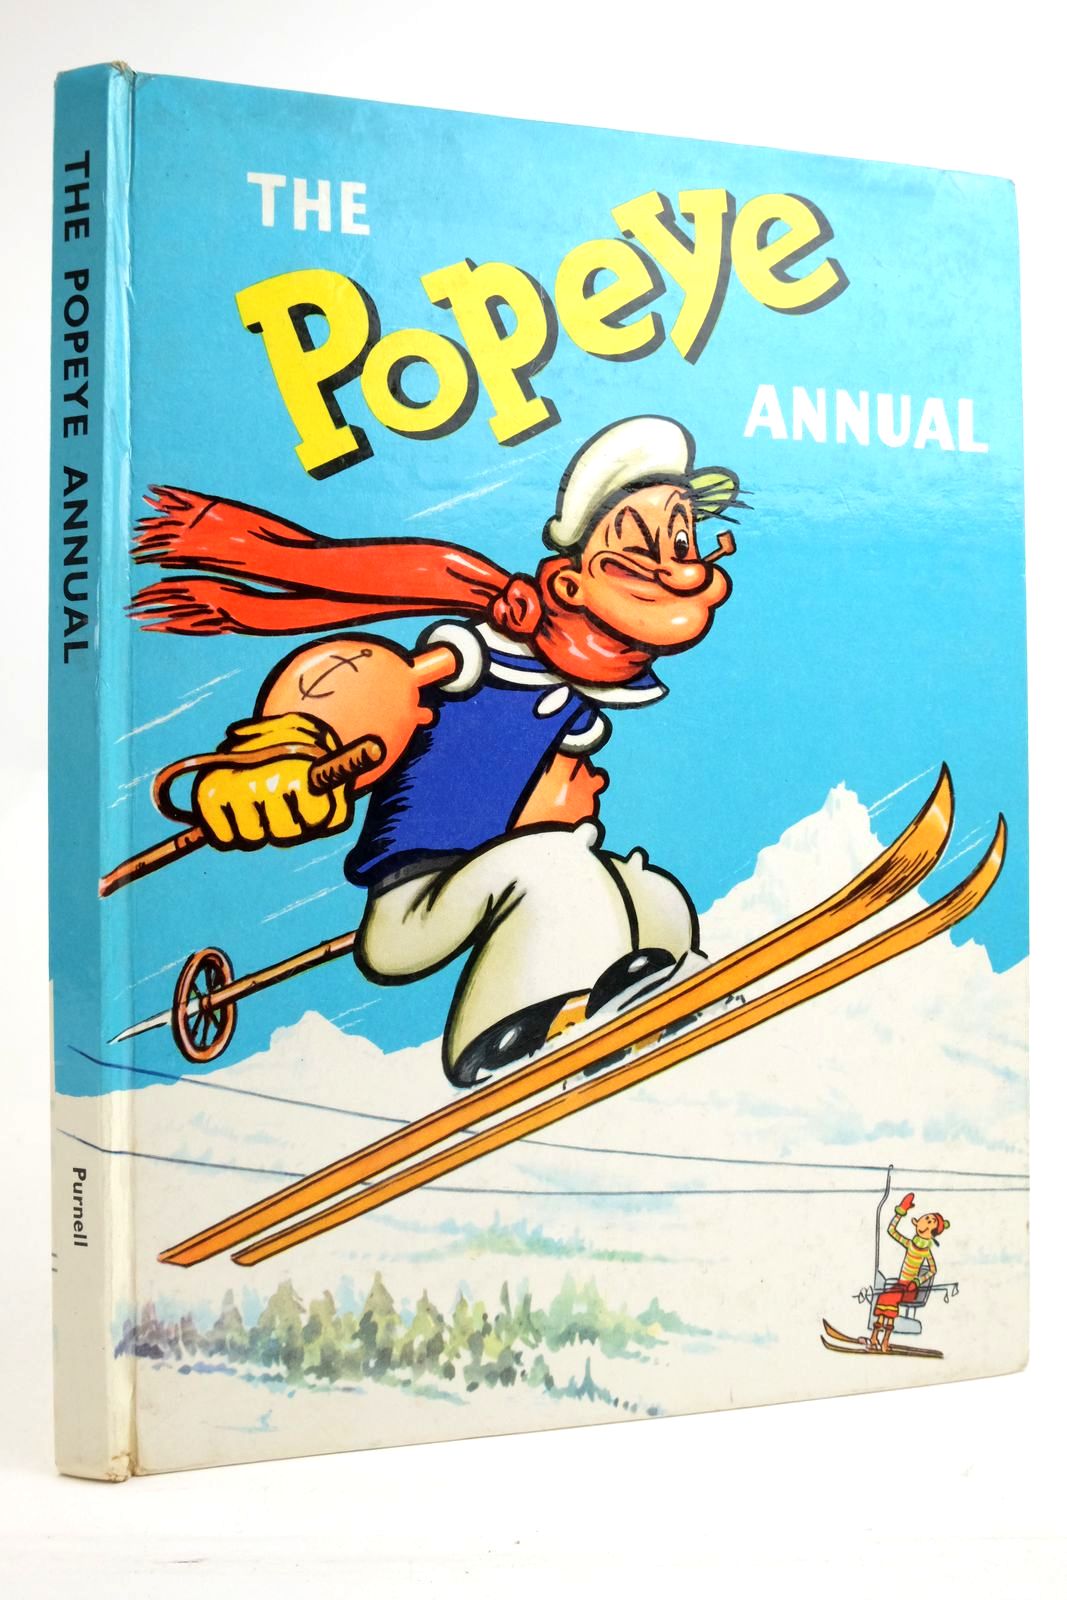 Photo of THE POPEYE ANNUAL illustrated by Cattermole, George published by Purnell (STOCK CODE: 2136168)  for sale by Stella & Rose's Books